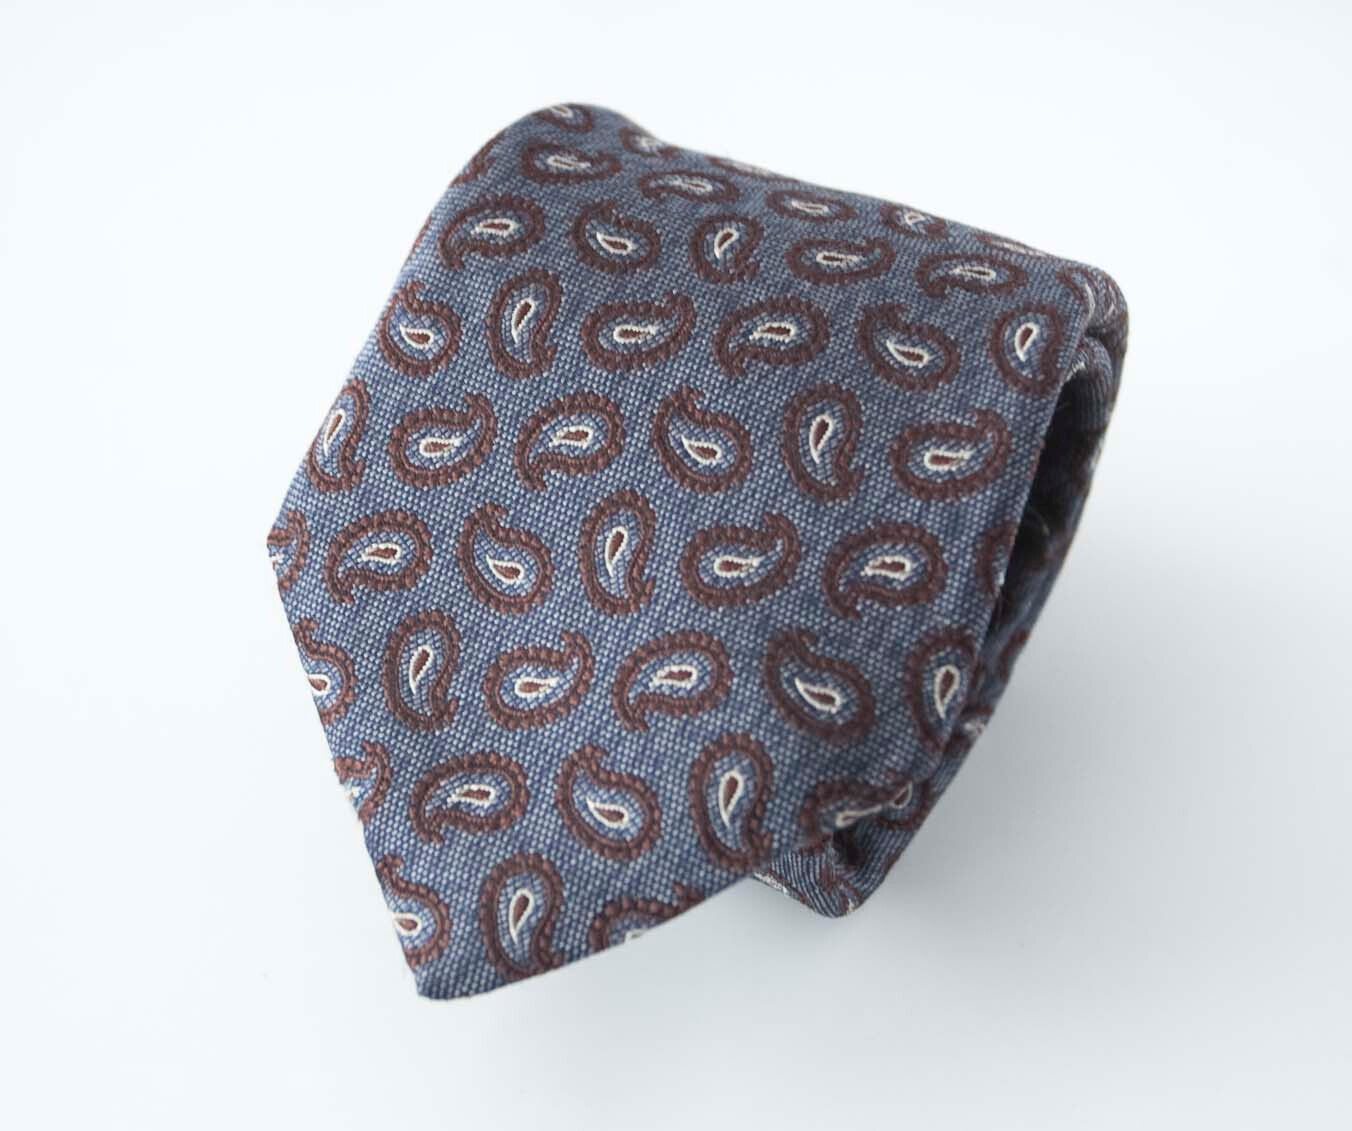 Canali Tie 100% Silk Paisley Made in Italy  *gD0331p